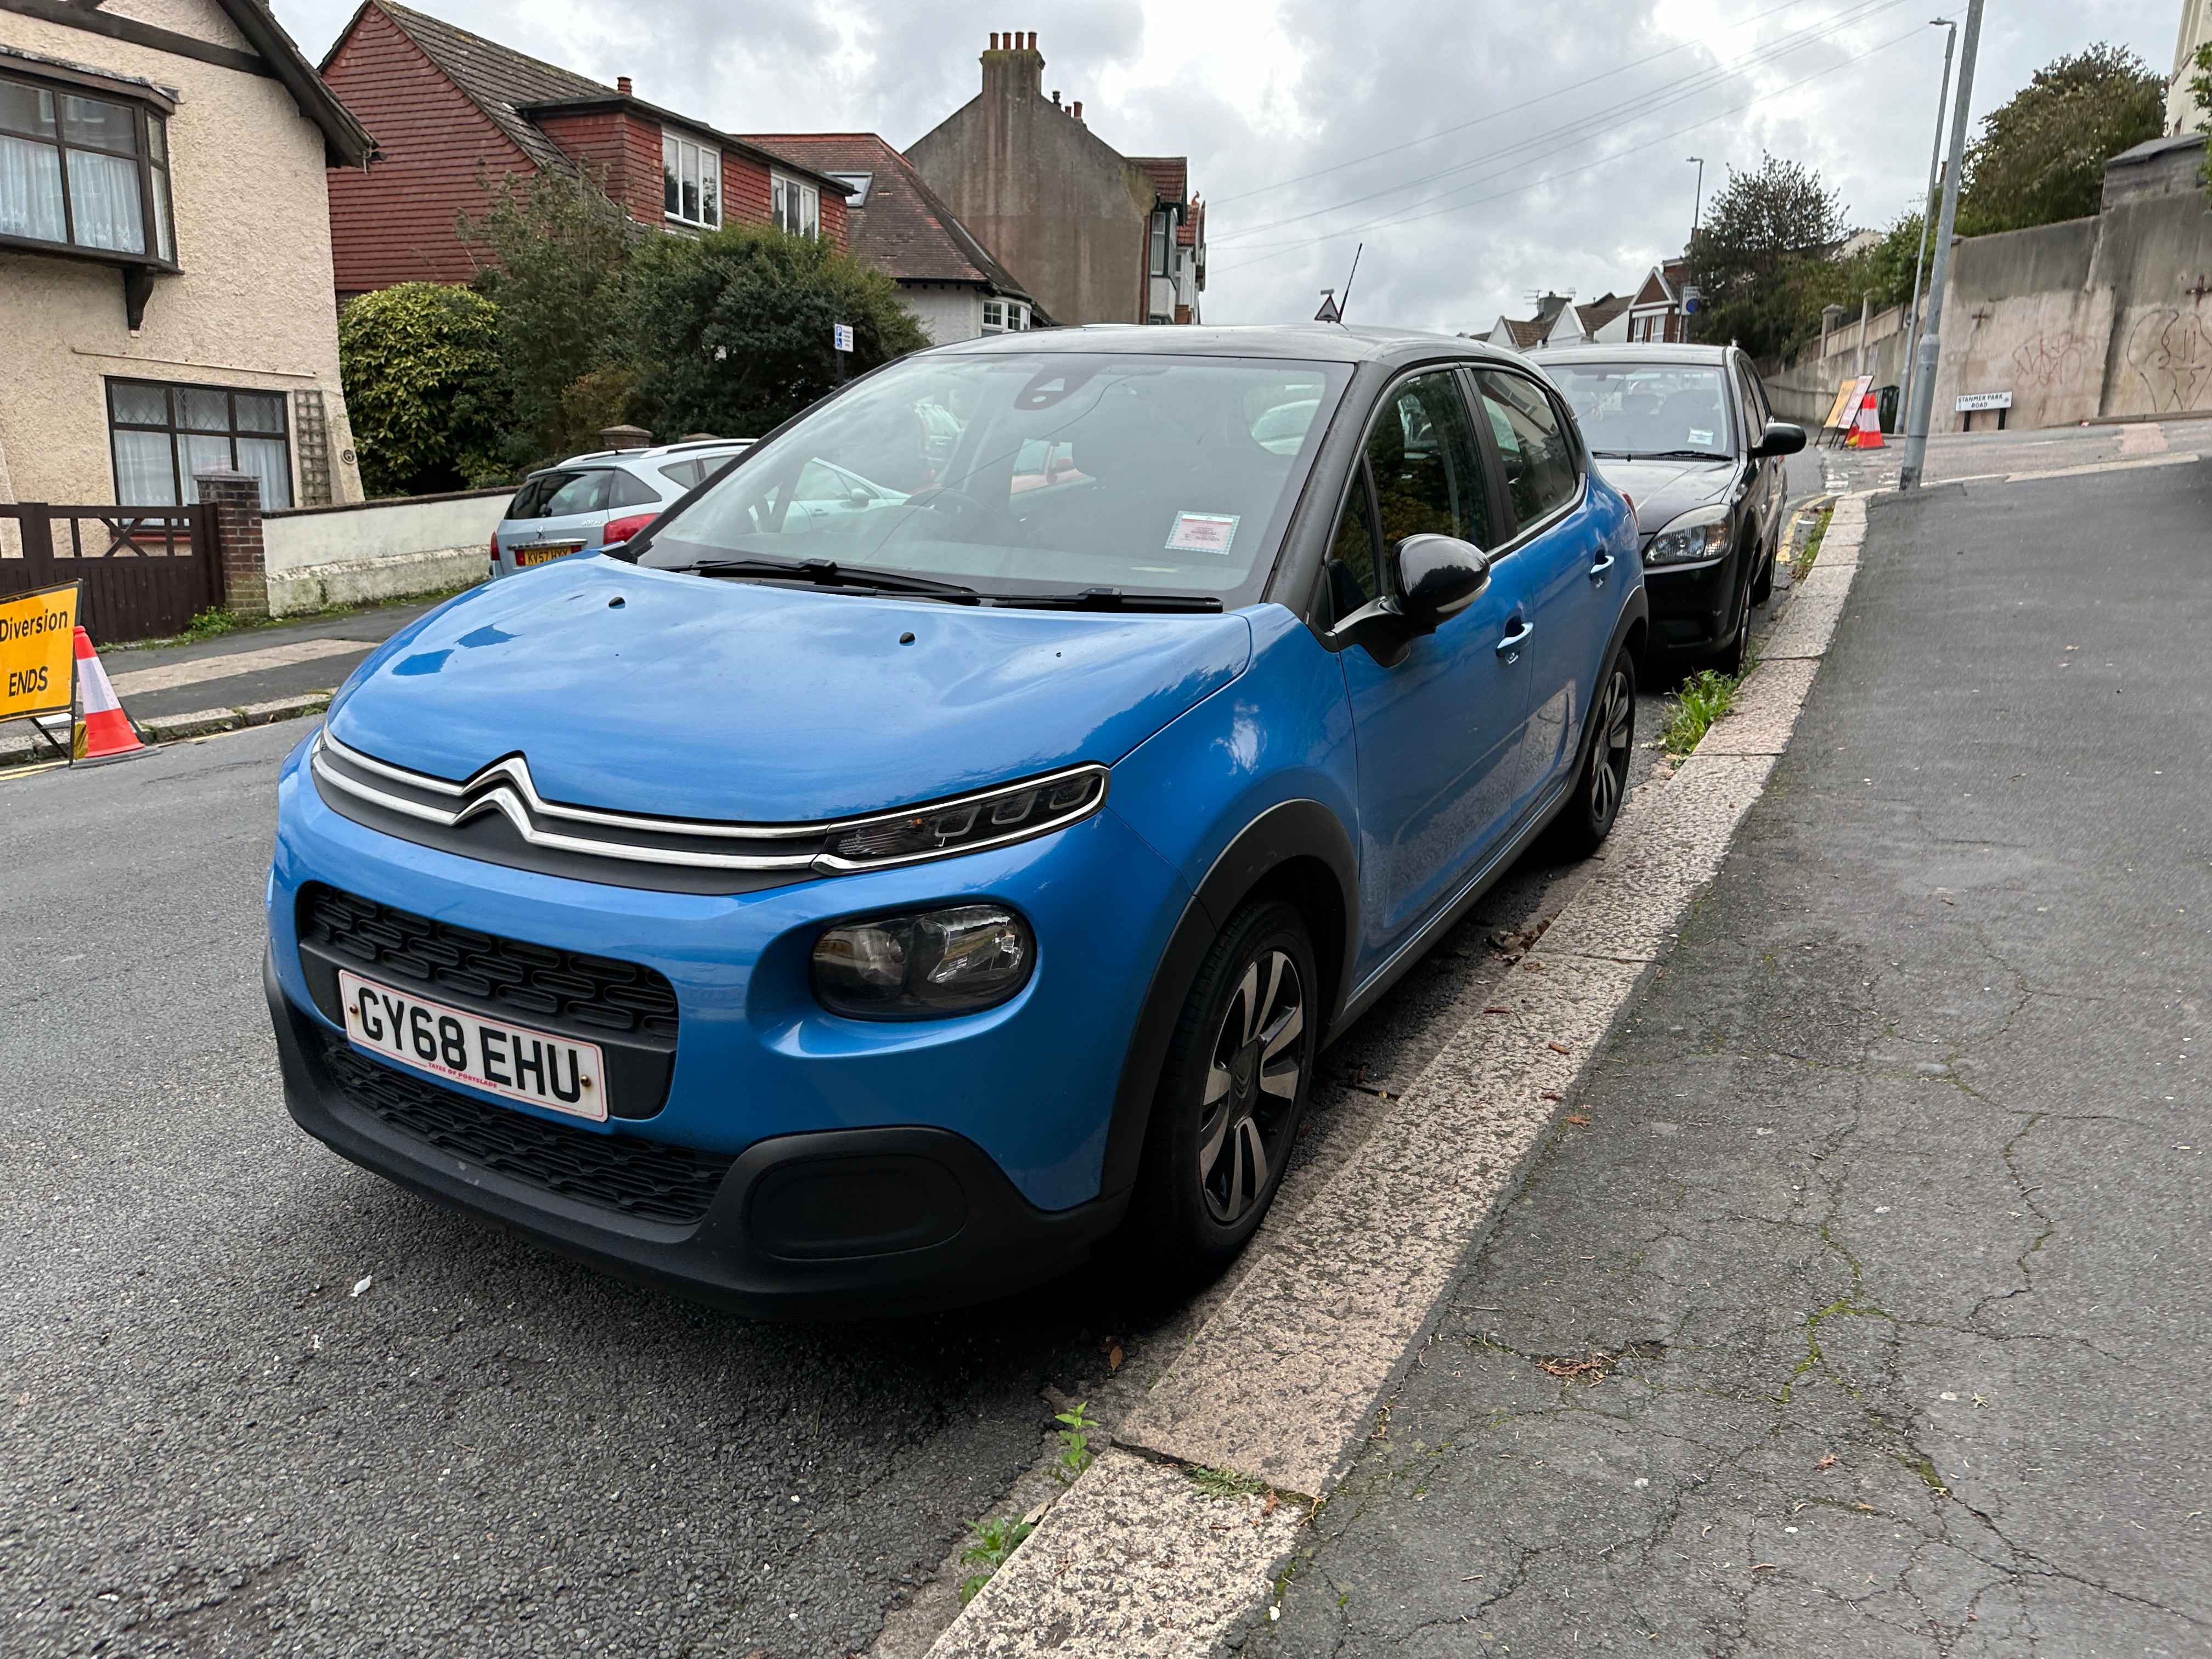 Photograph of GY68 EHU - a Blue Citroen C3 parked in Hollingdean by a non-resident who uses the local area as part of their Brighton commute. The sixth of twelve photographs supplied by the residents of Hollingdean.